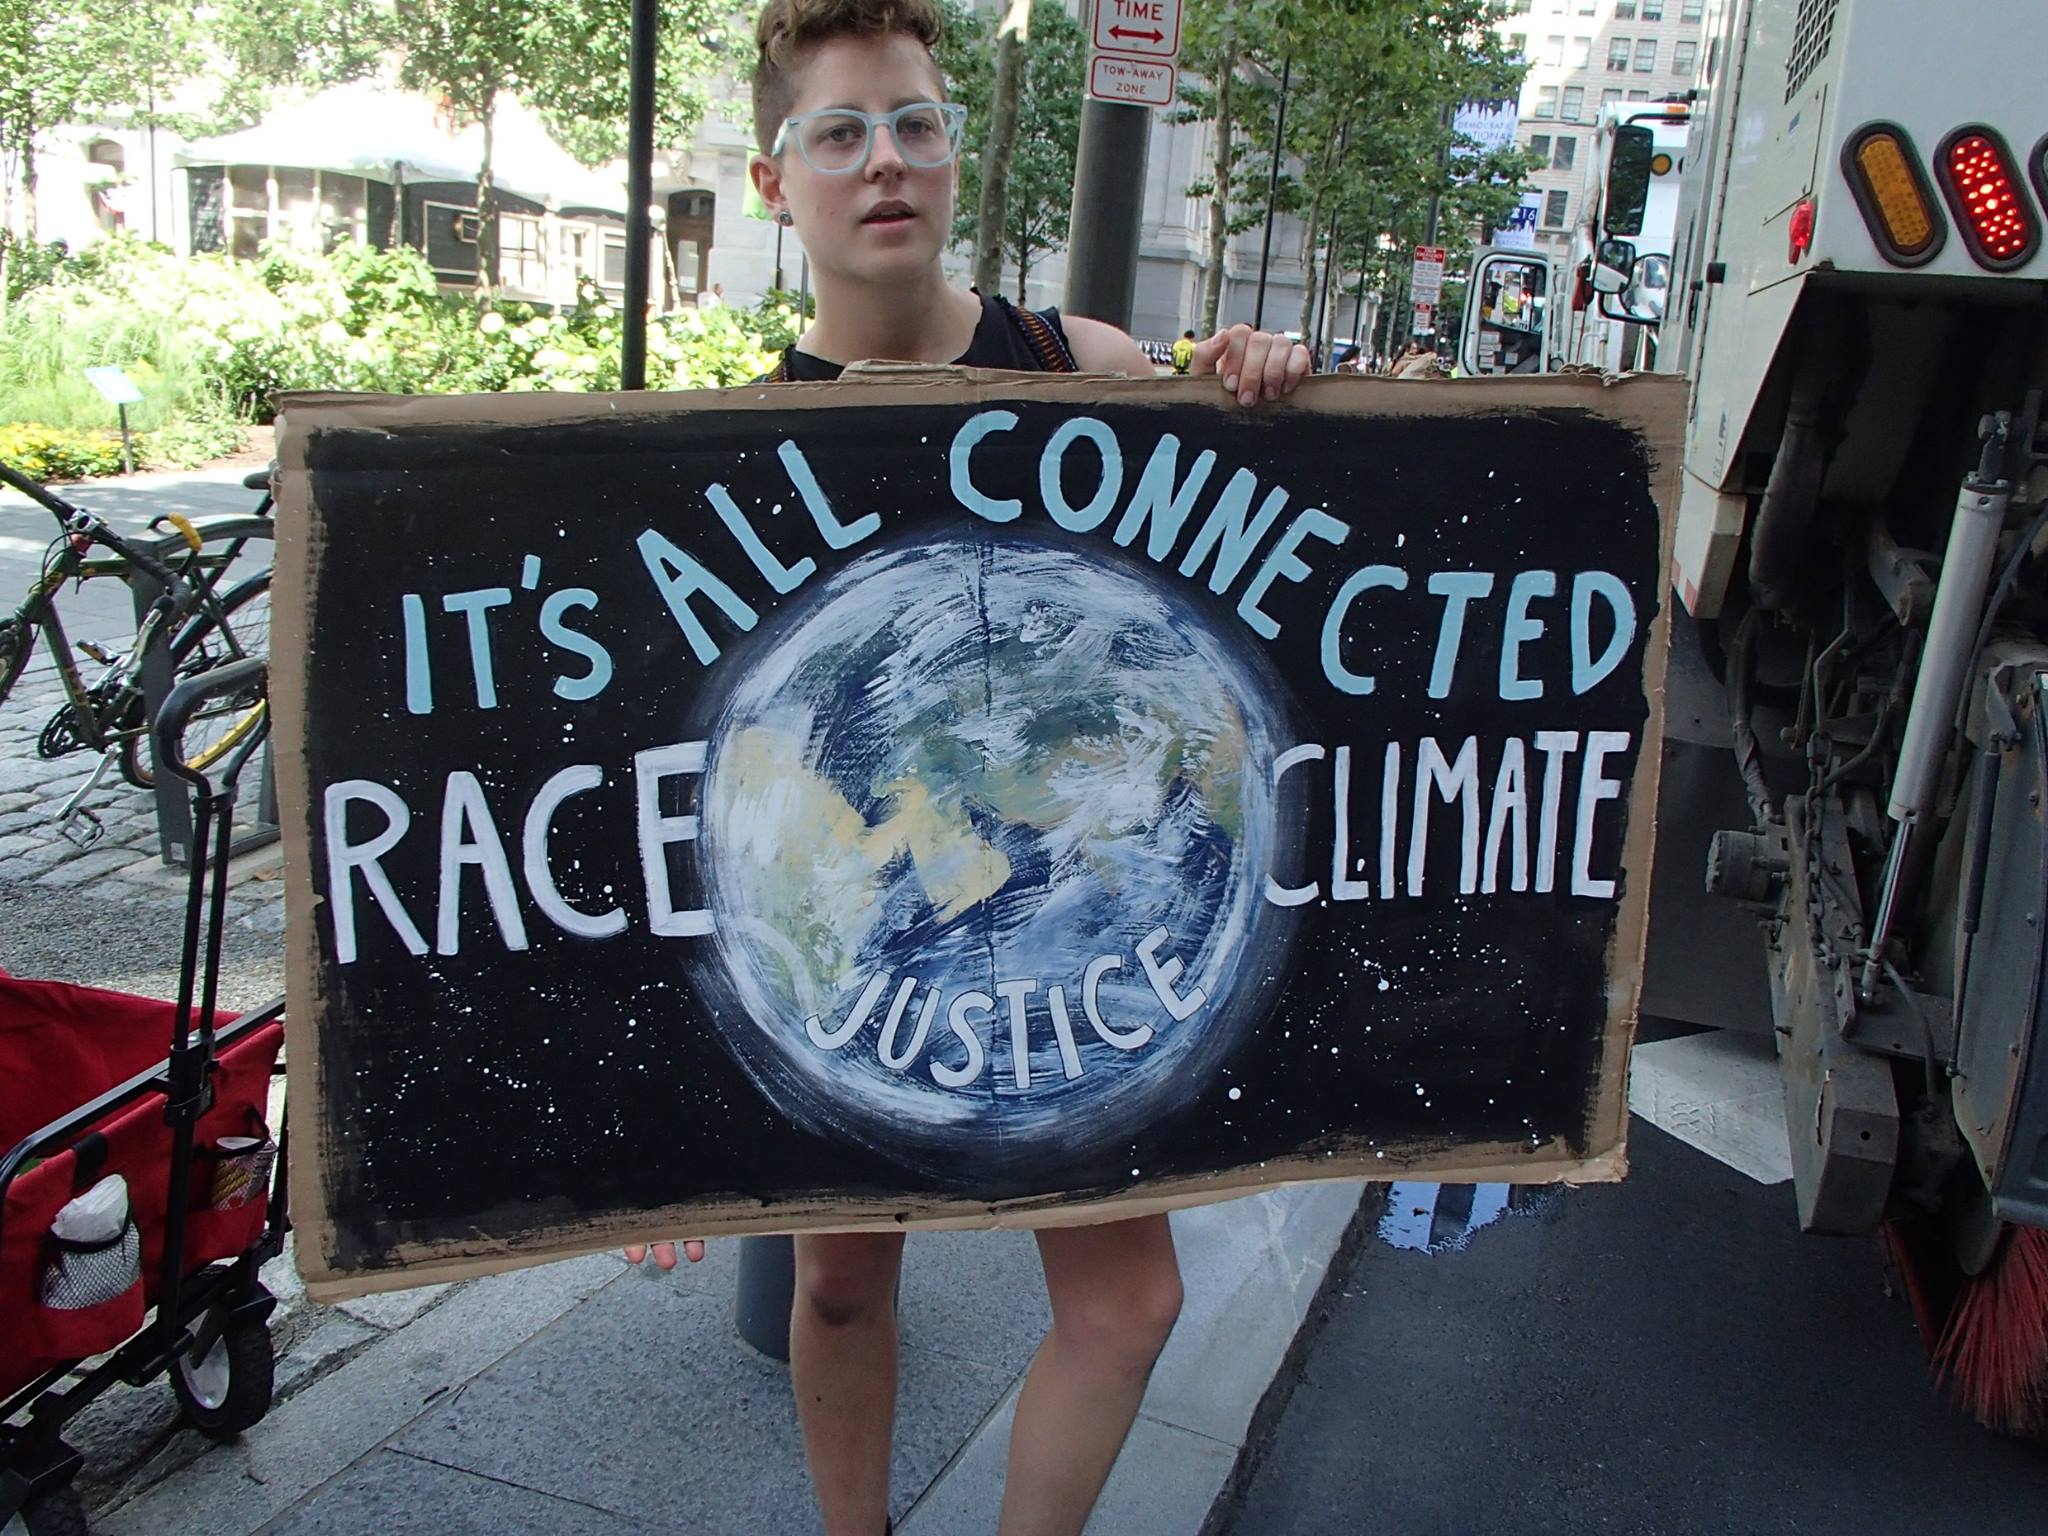 A demonstrator outside the Democratic National Convention on Monday. Photos by John Penley